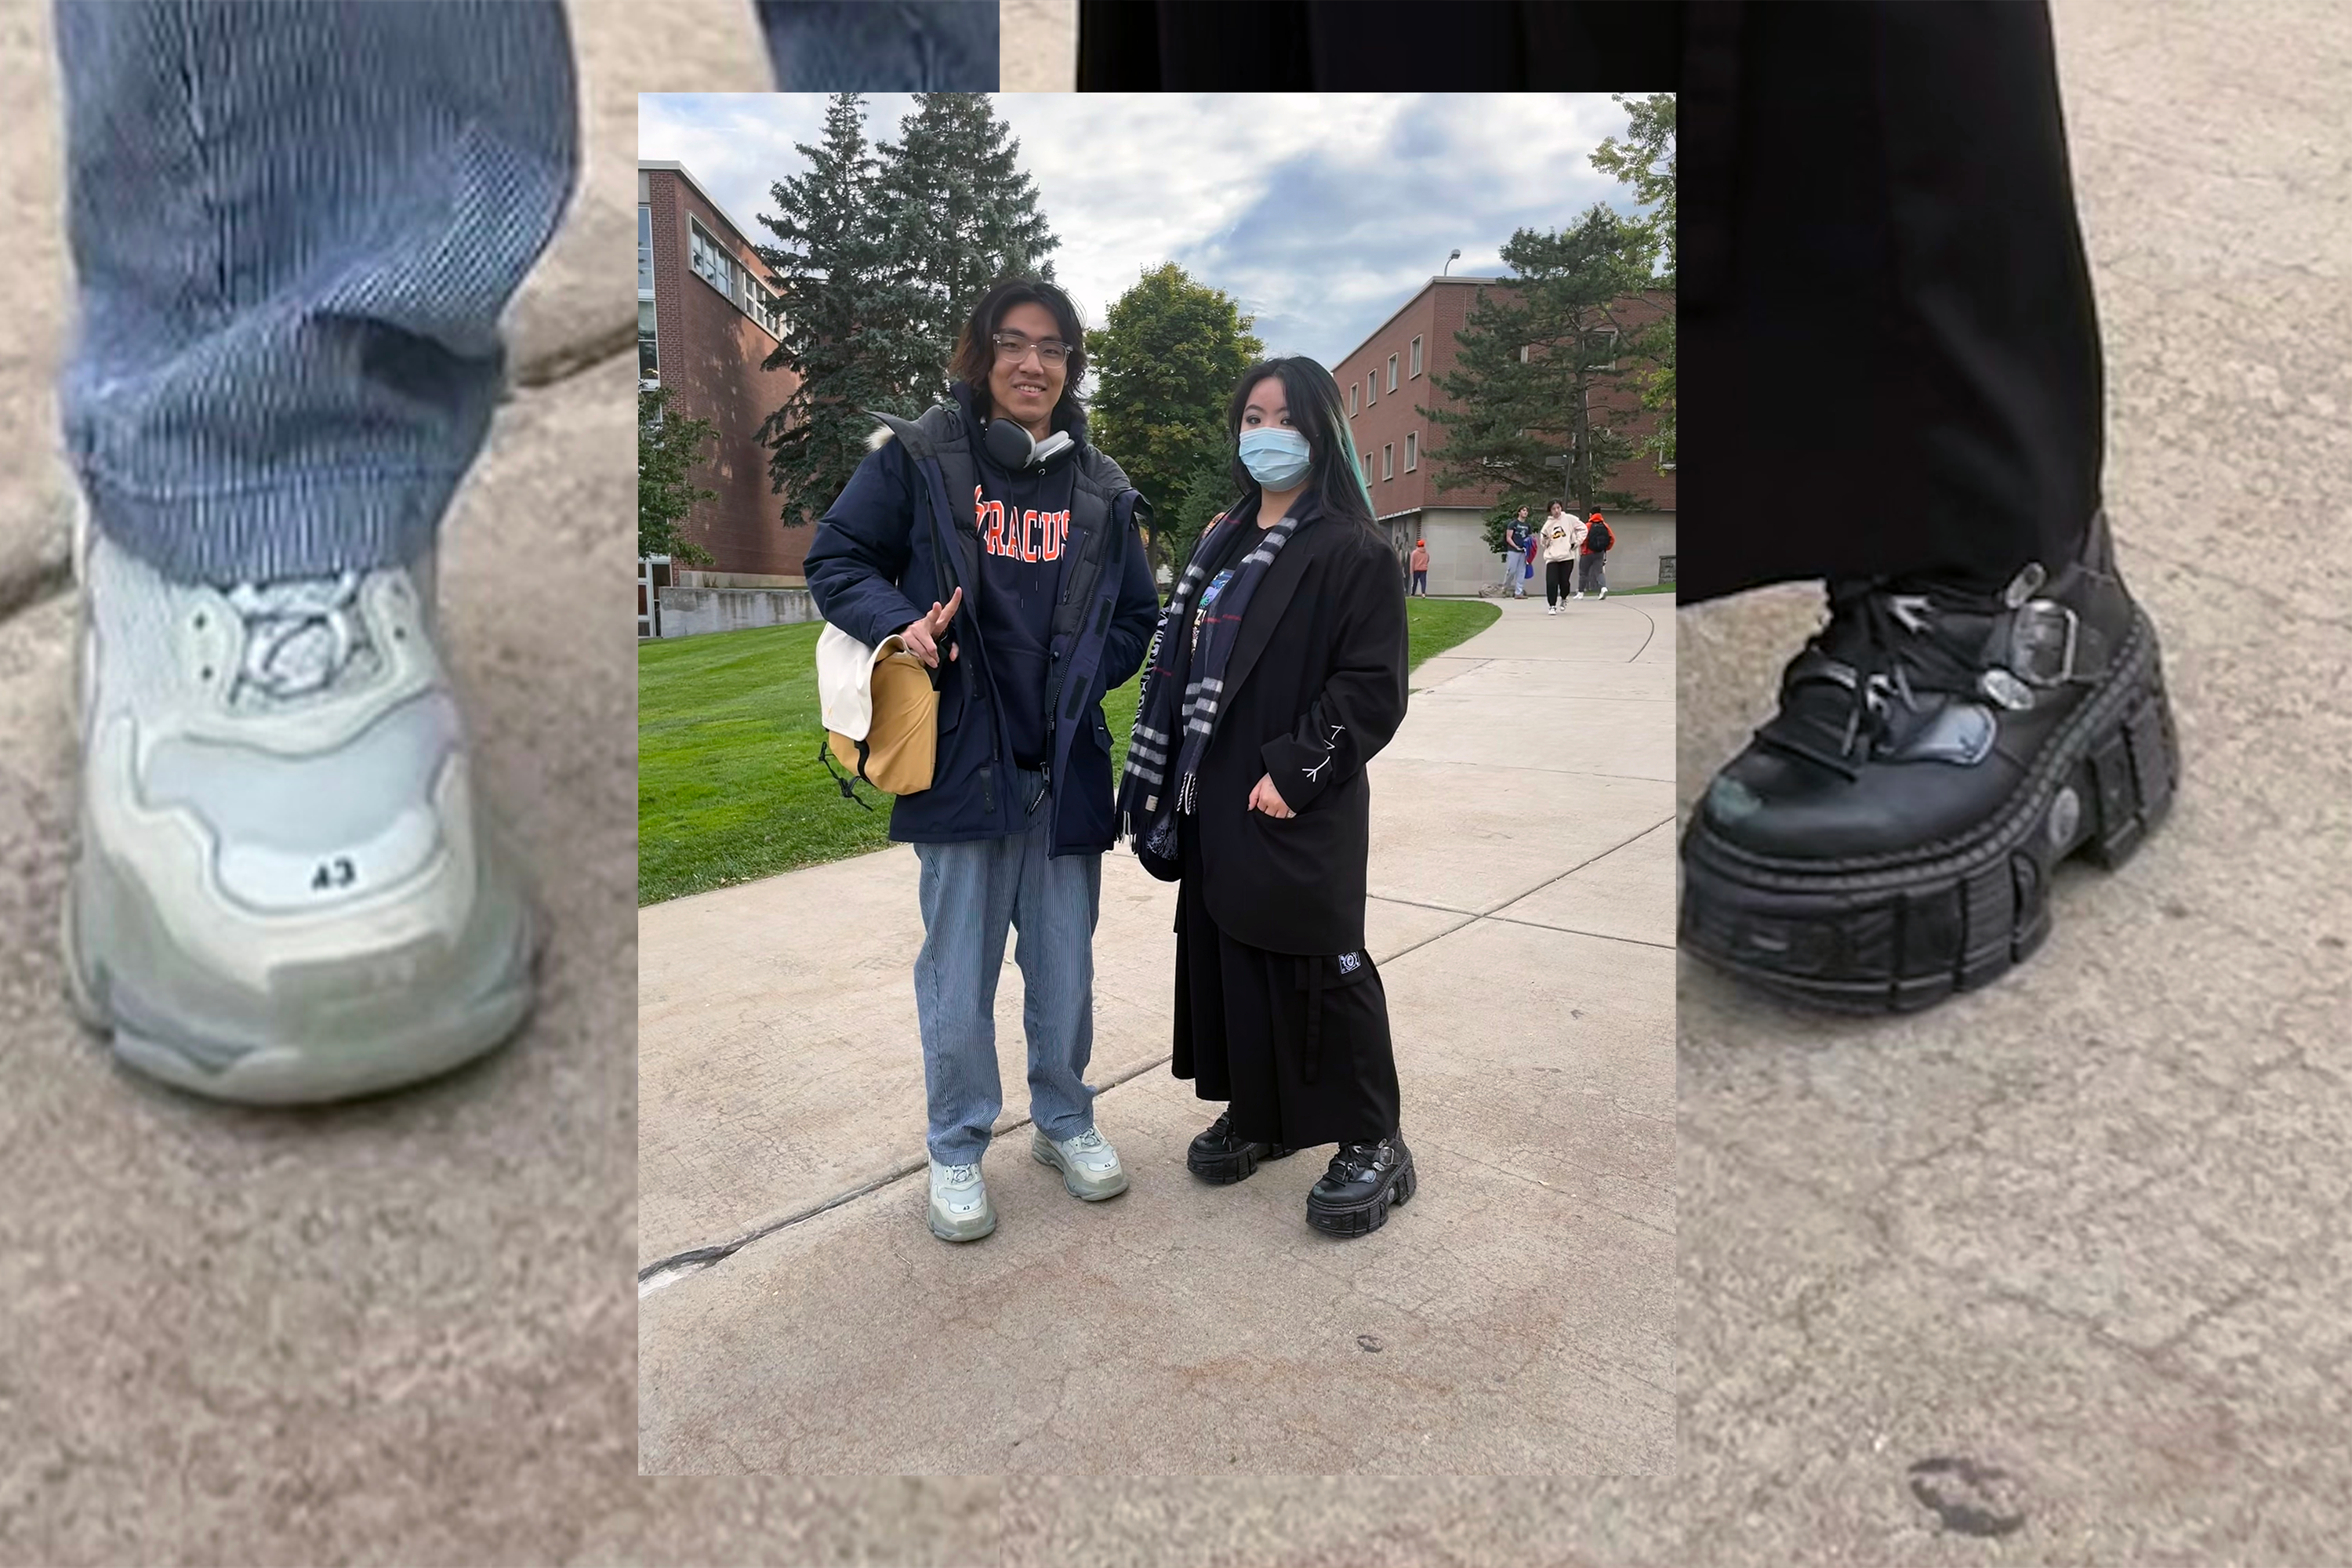 Syracuse students on campus in autumn-wear